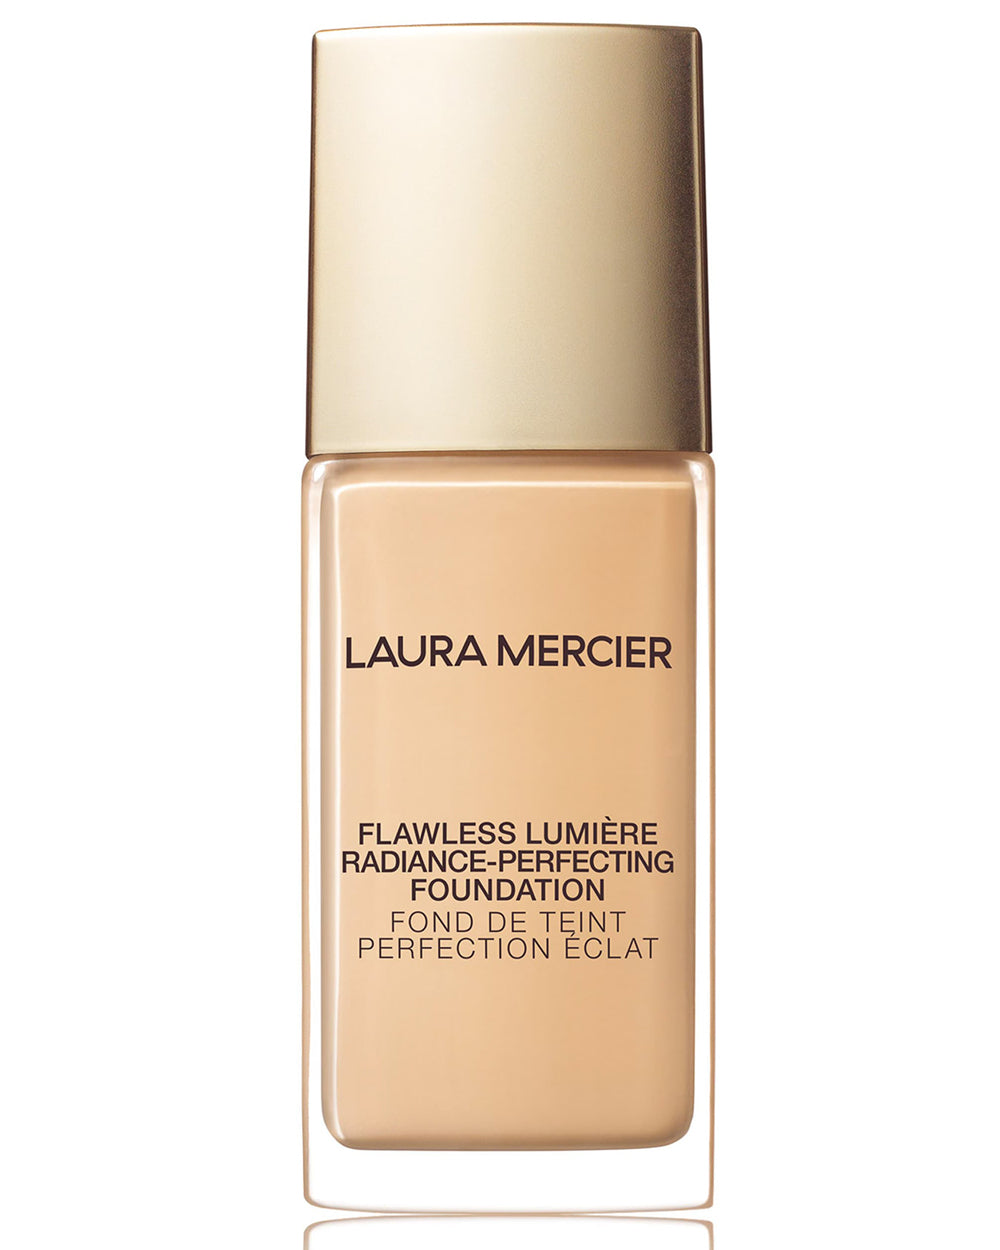 Flawless Lumiere Foundation in 2N1 Cashew